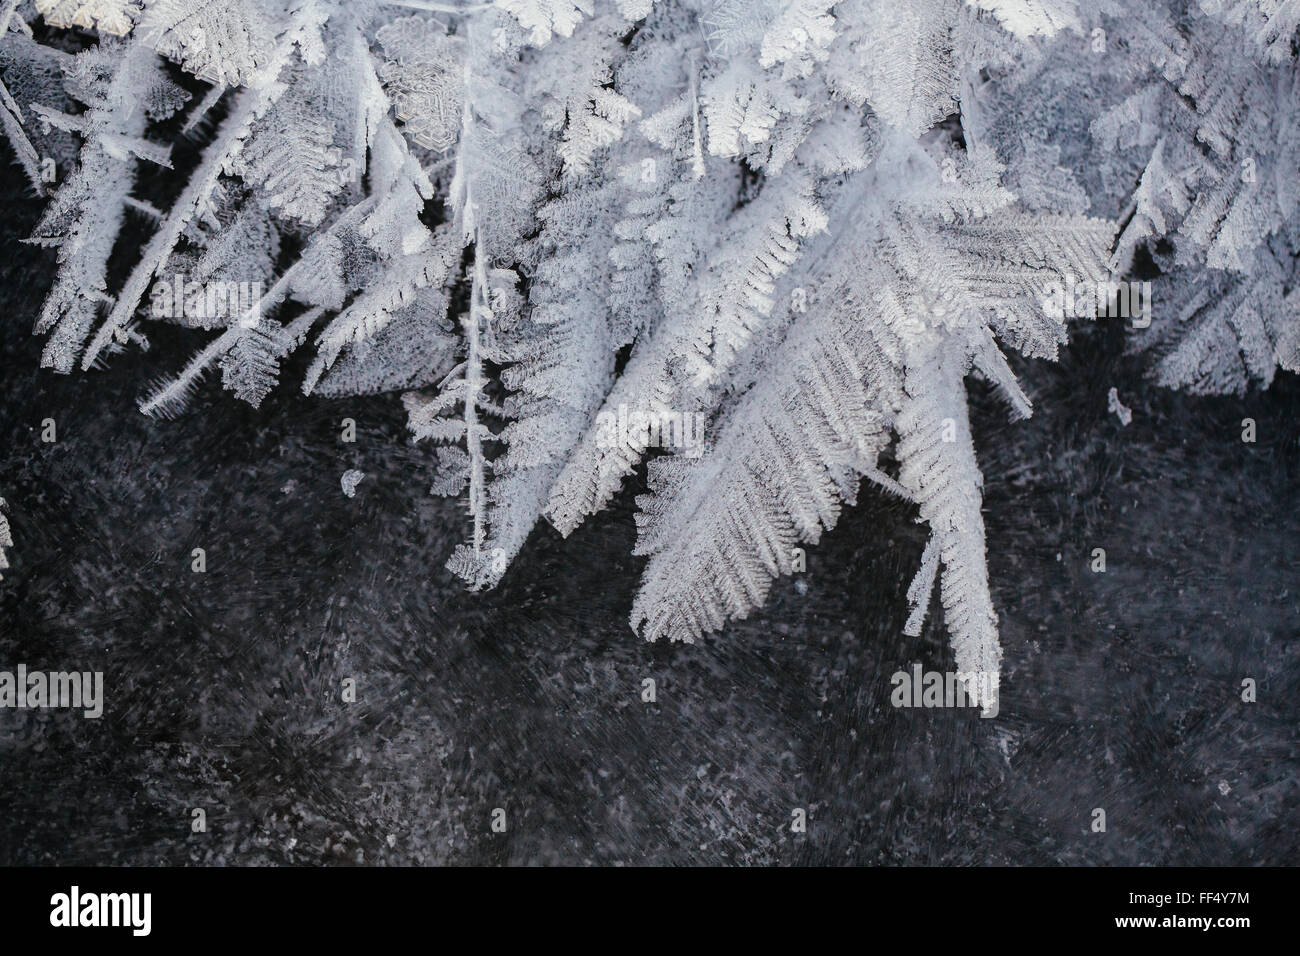 Hoar frost forms feather-like crystals on the ice surface of Patricia Lake in Jasper National Park early in the sub-zero Canadian winter climate. Stock Photo